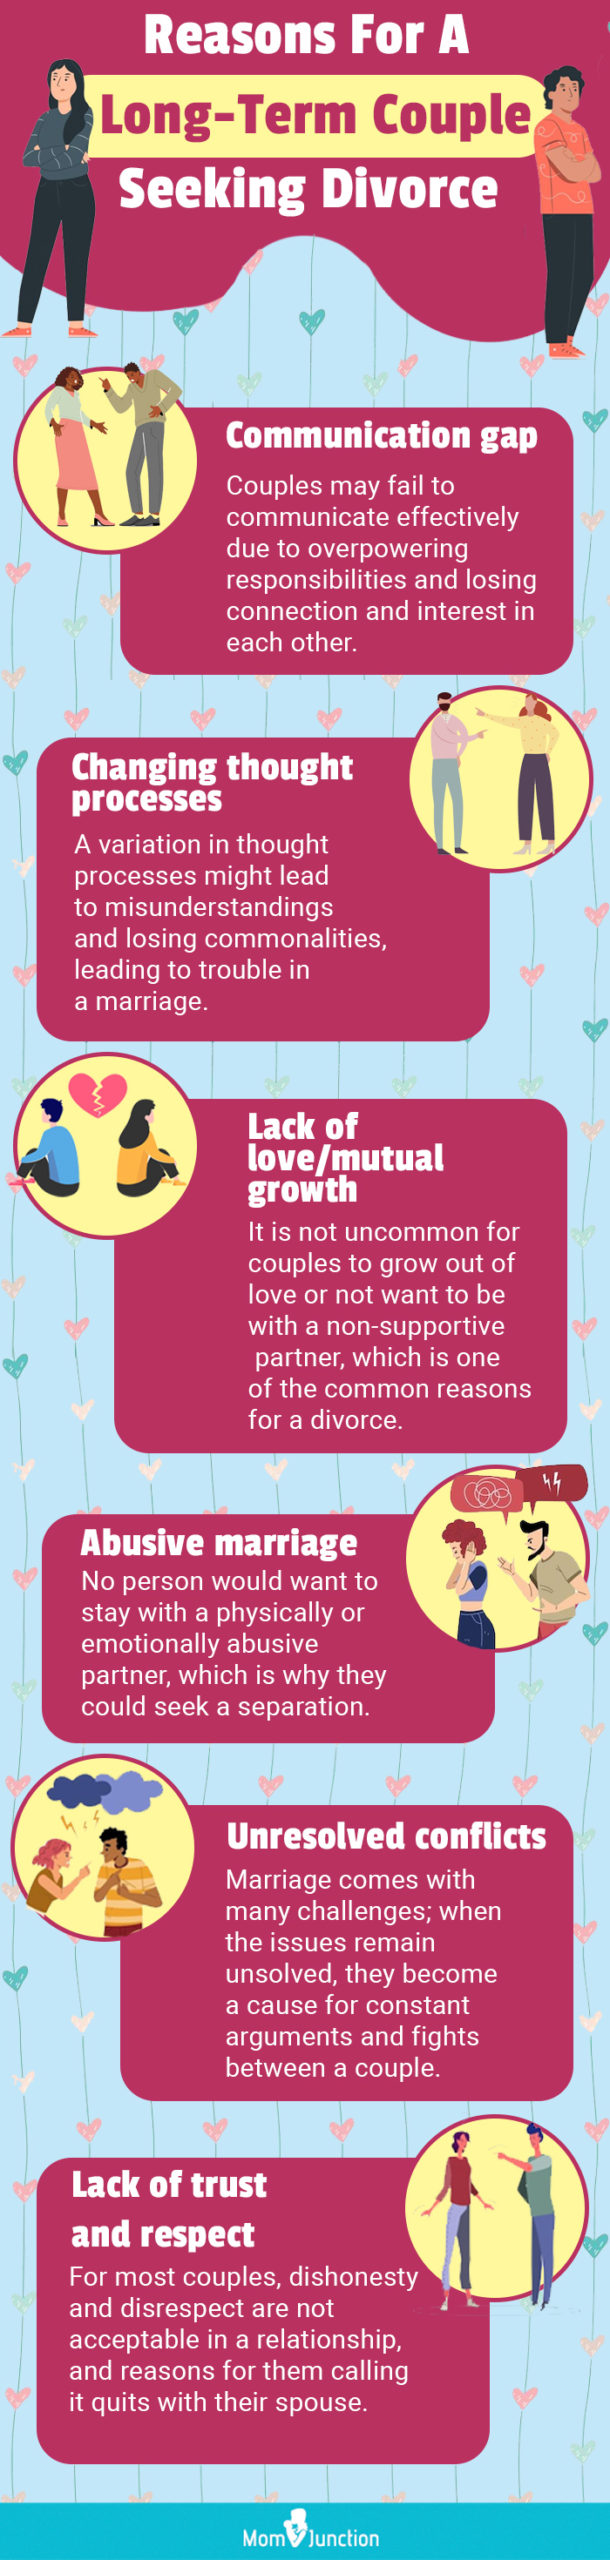 reasons for a long-term couple seeking divorce (infographic)